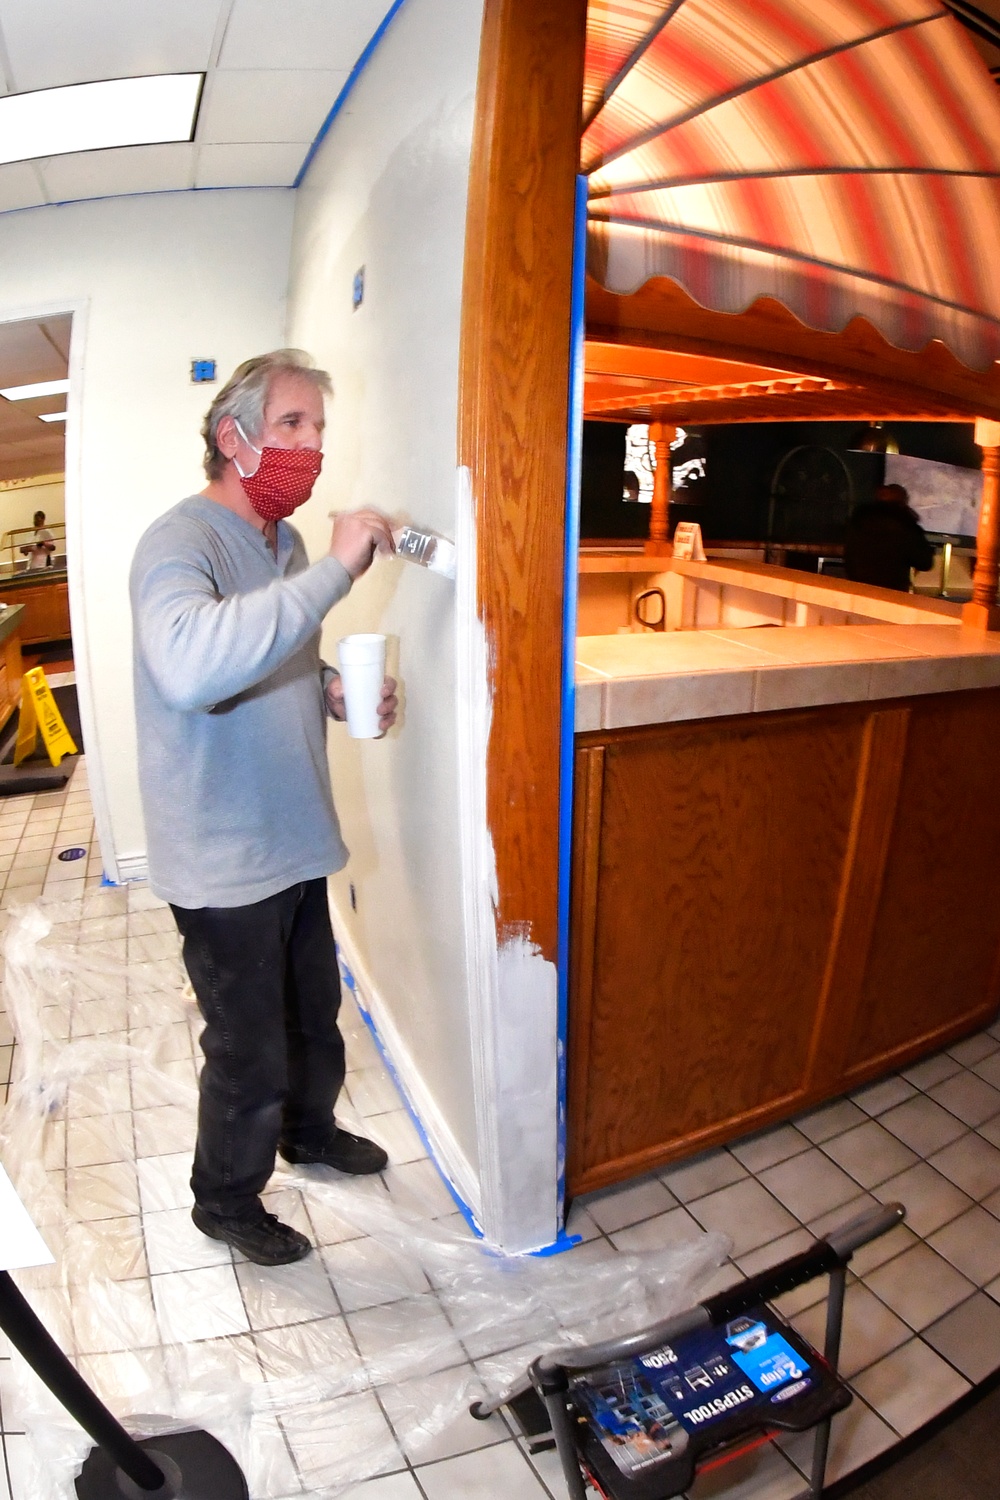 Volunteers work to ‘freshen up’ appearance of Hill’s dining facilities